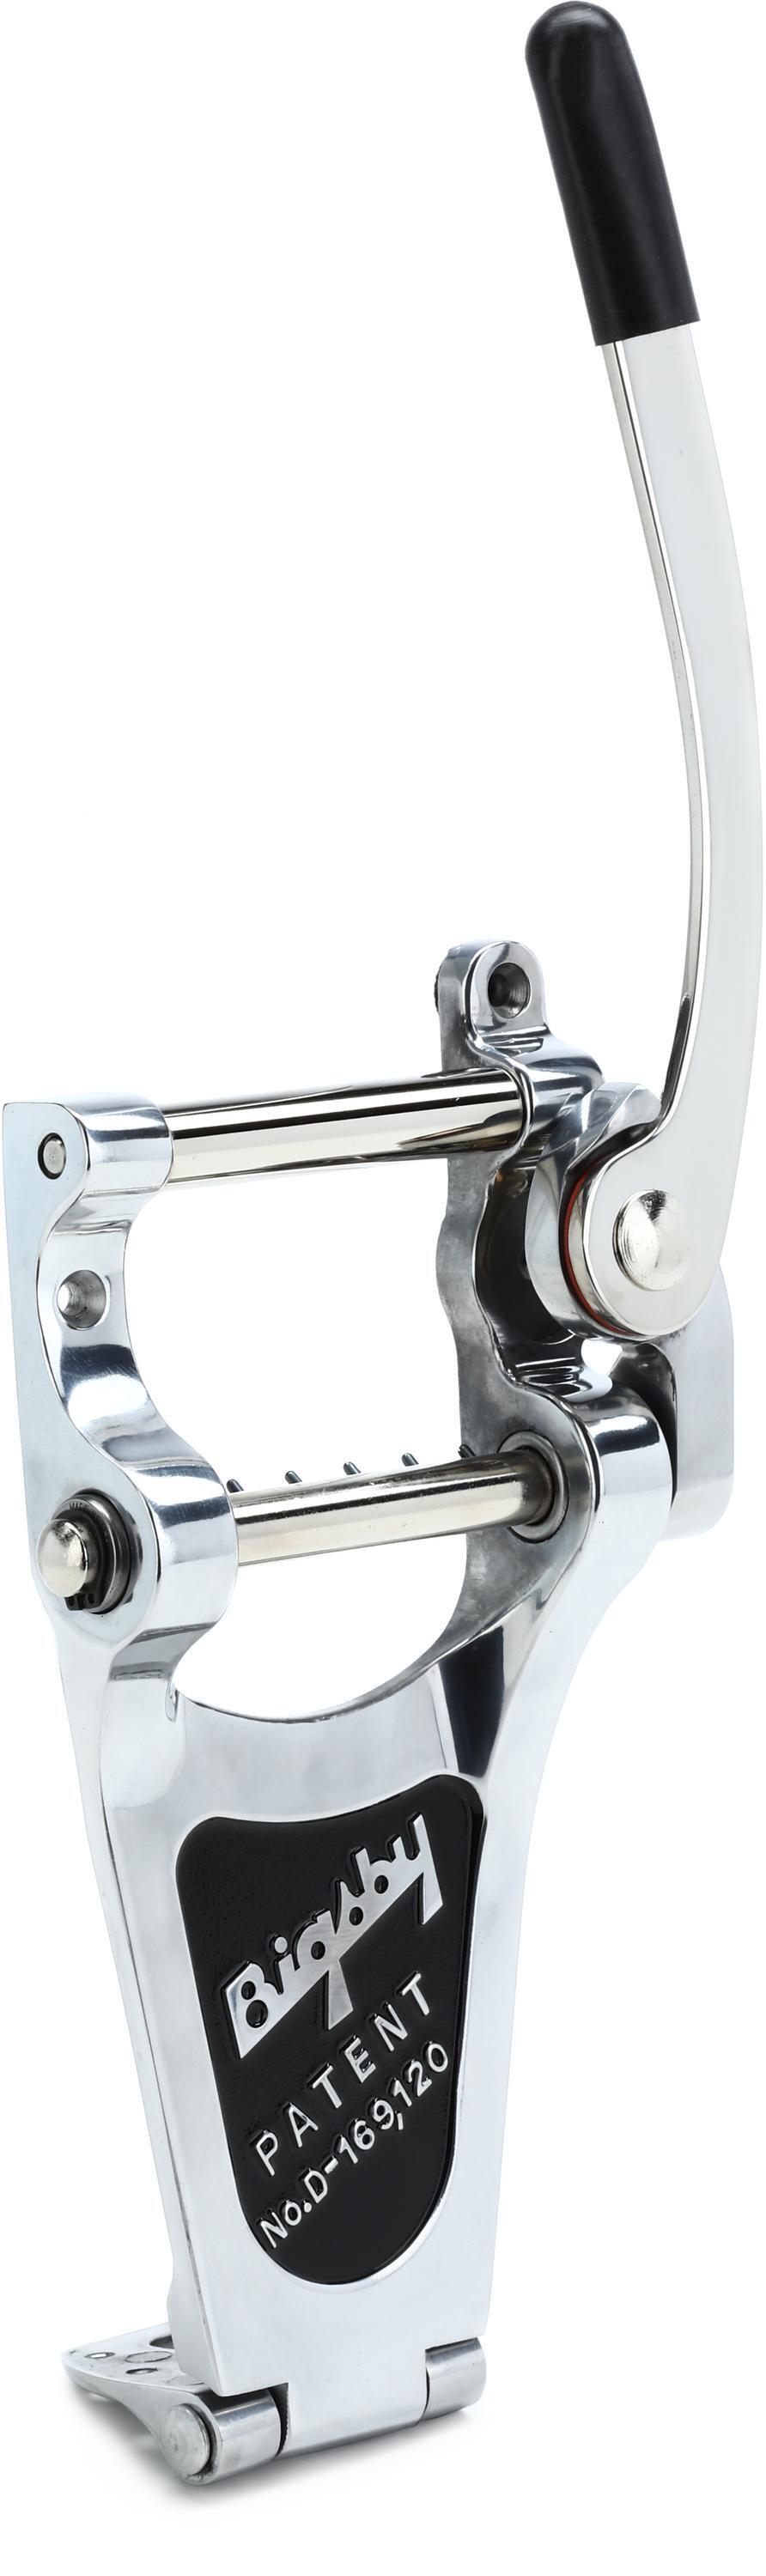 Bigsby Bigsby B7 Vibrato Tailpiece for Archtop Guitars - Aluminum